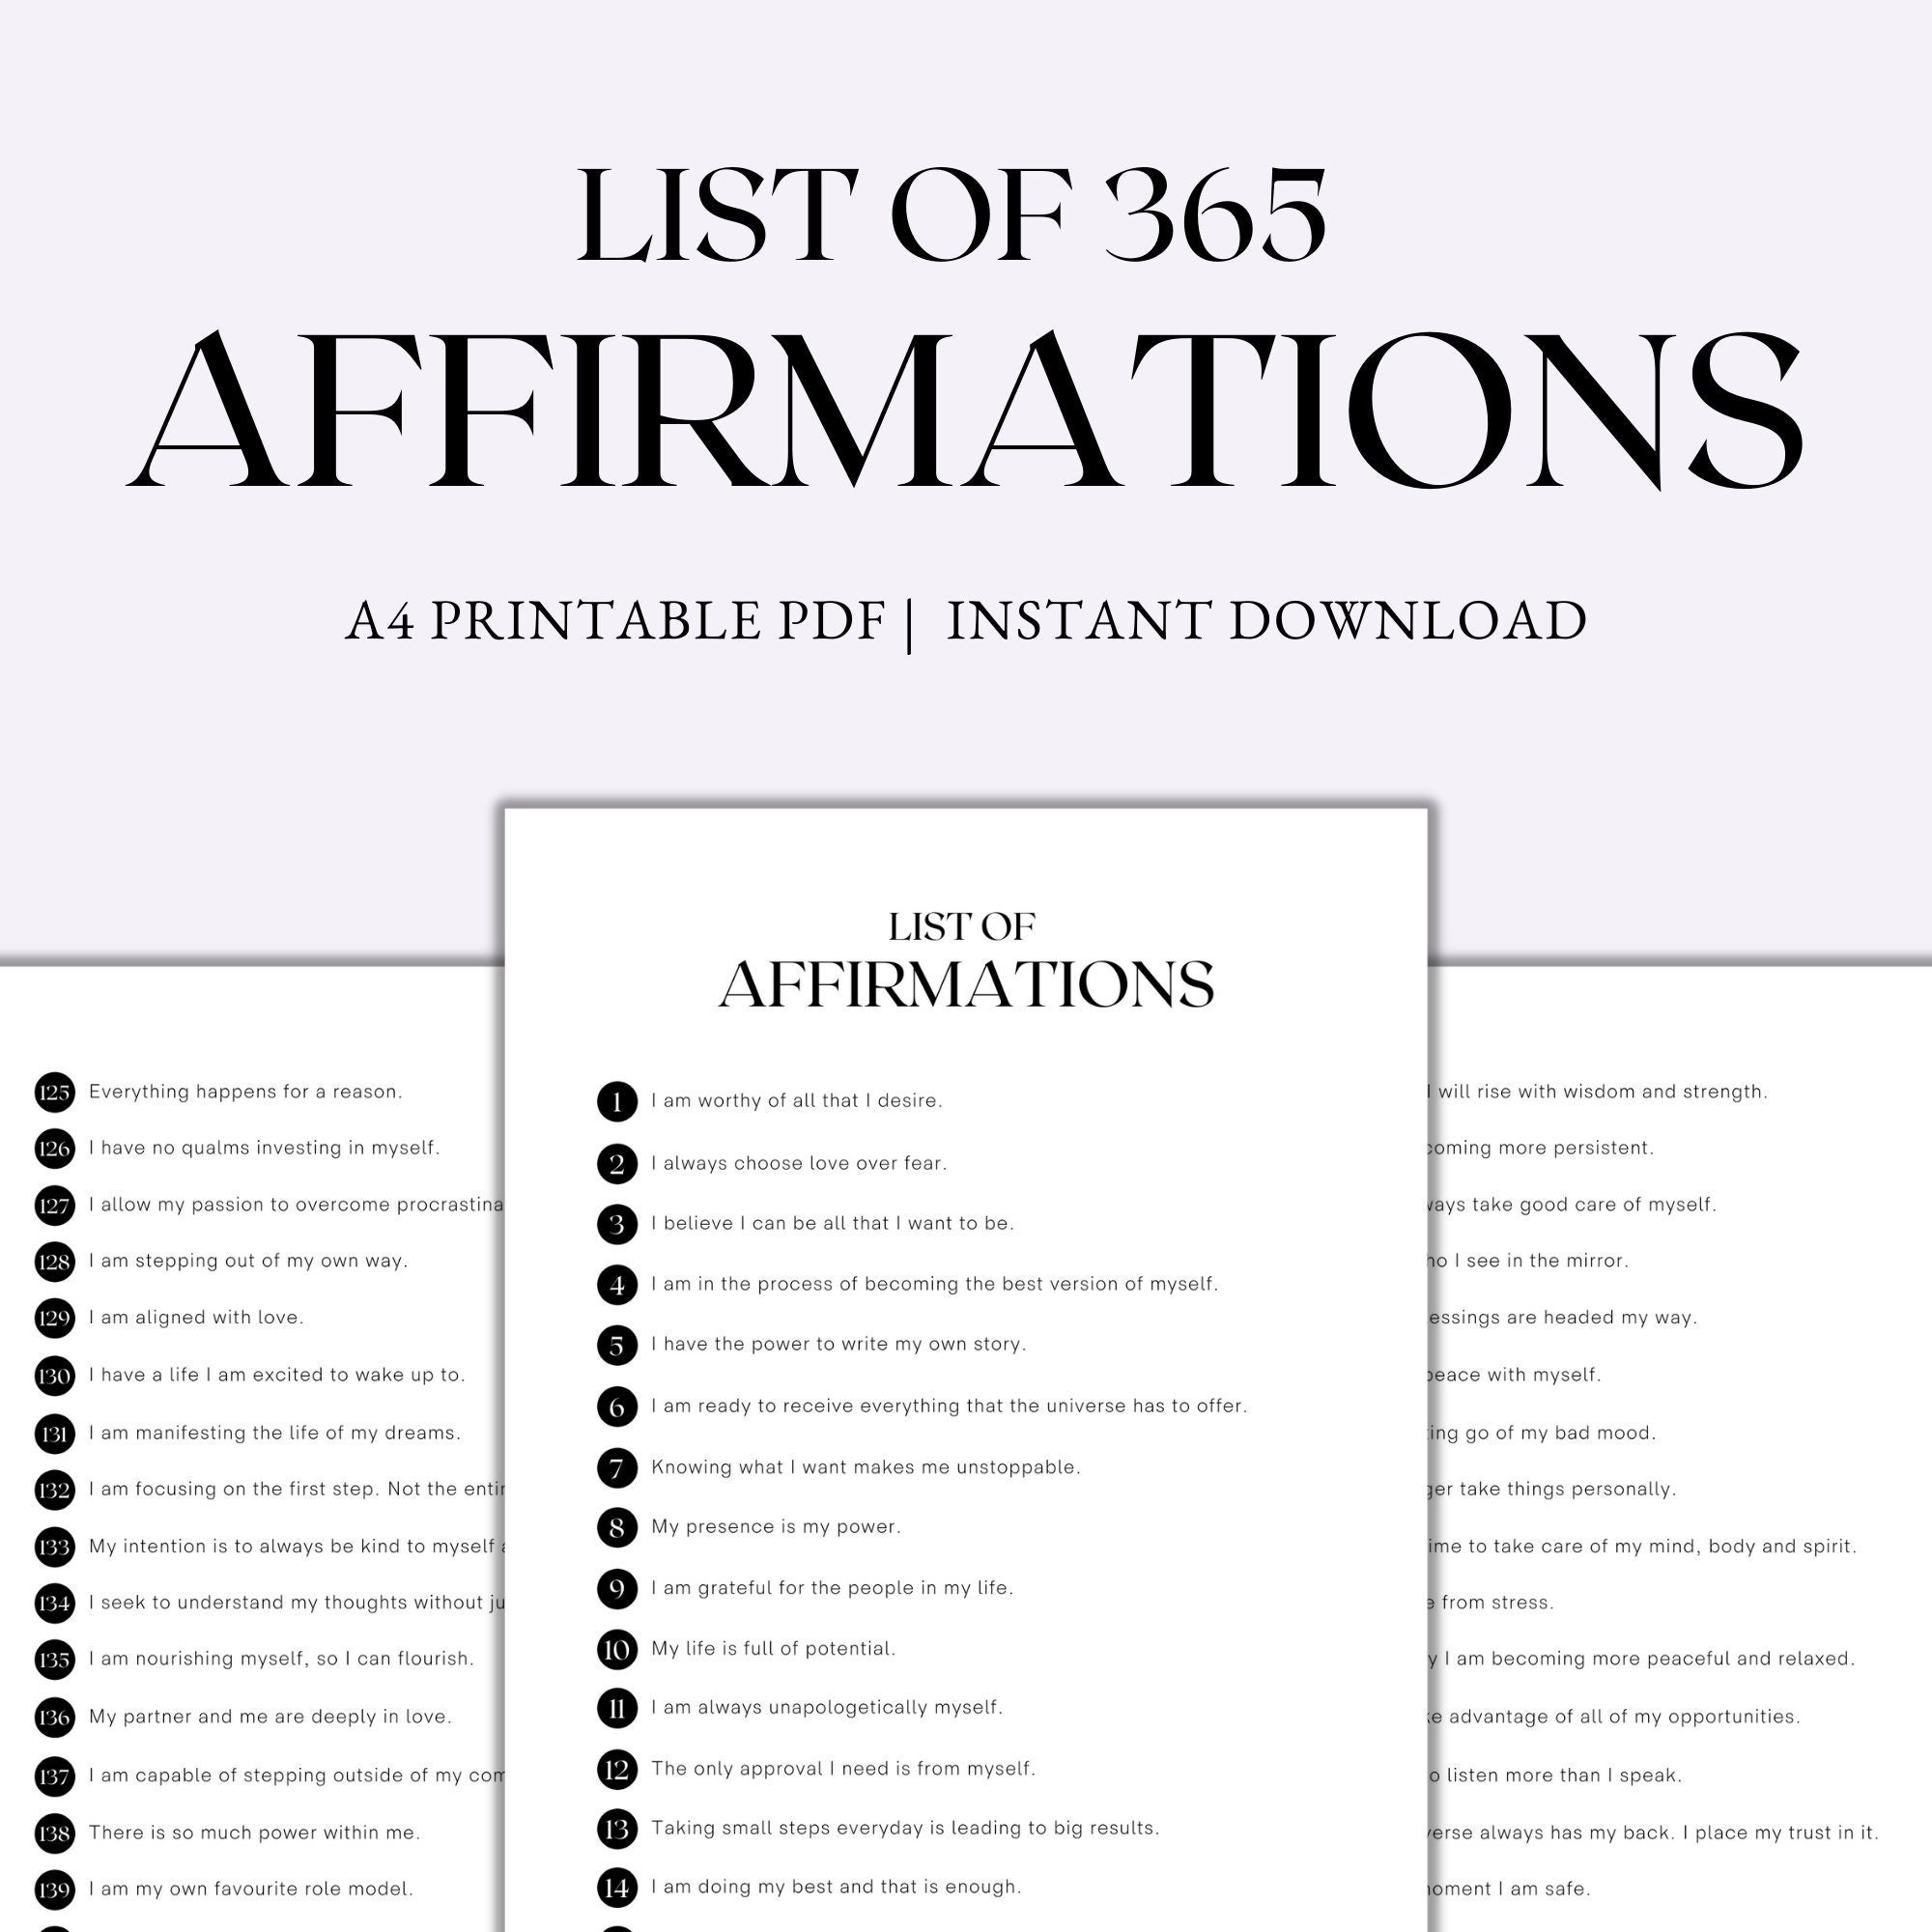 List Of 365 Affirmations Affirmations Printable Positive Etsy